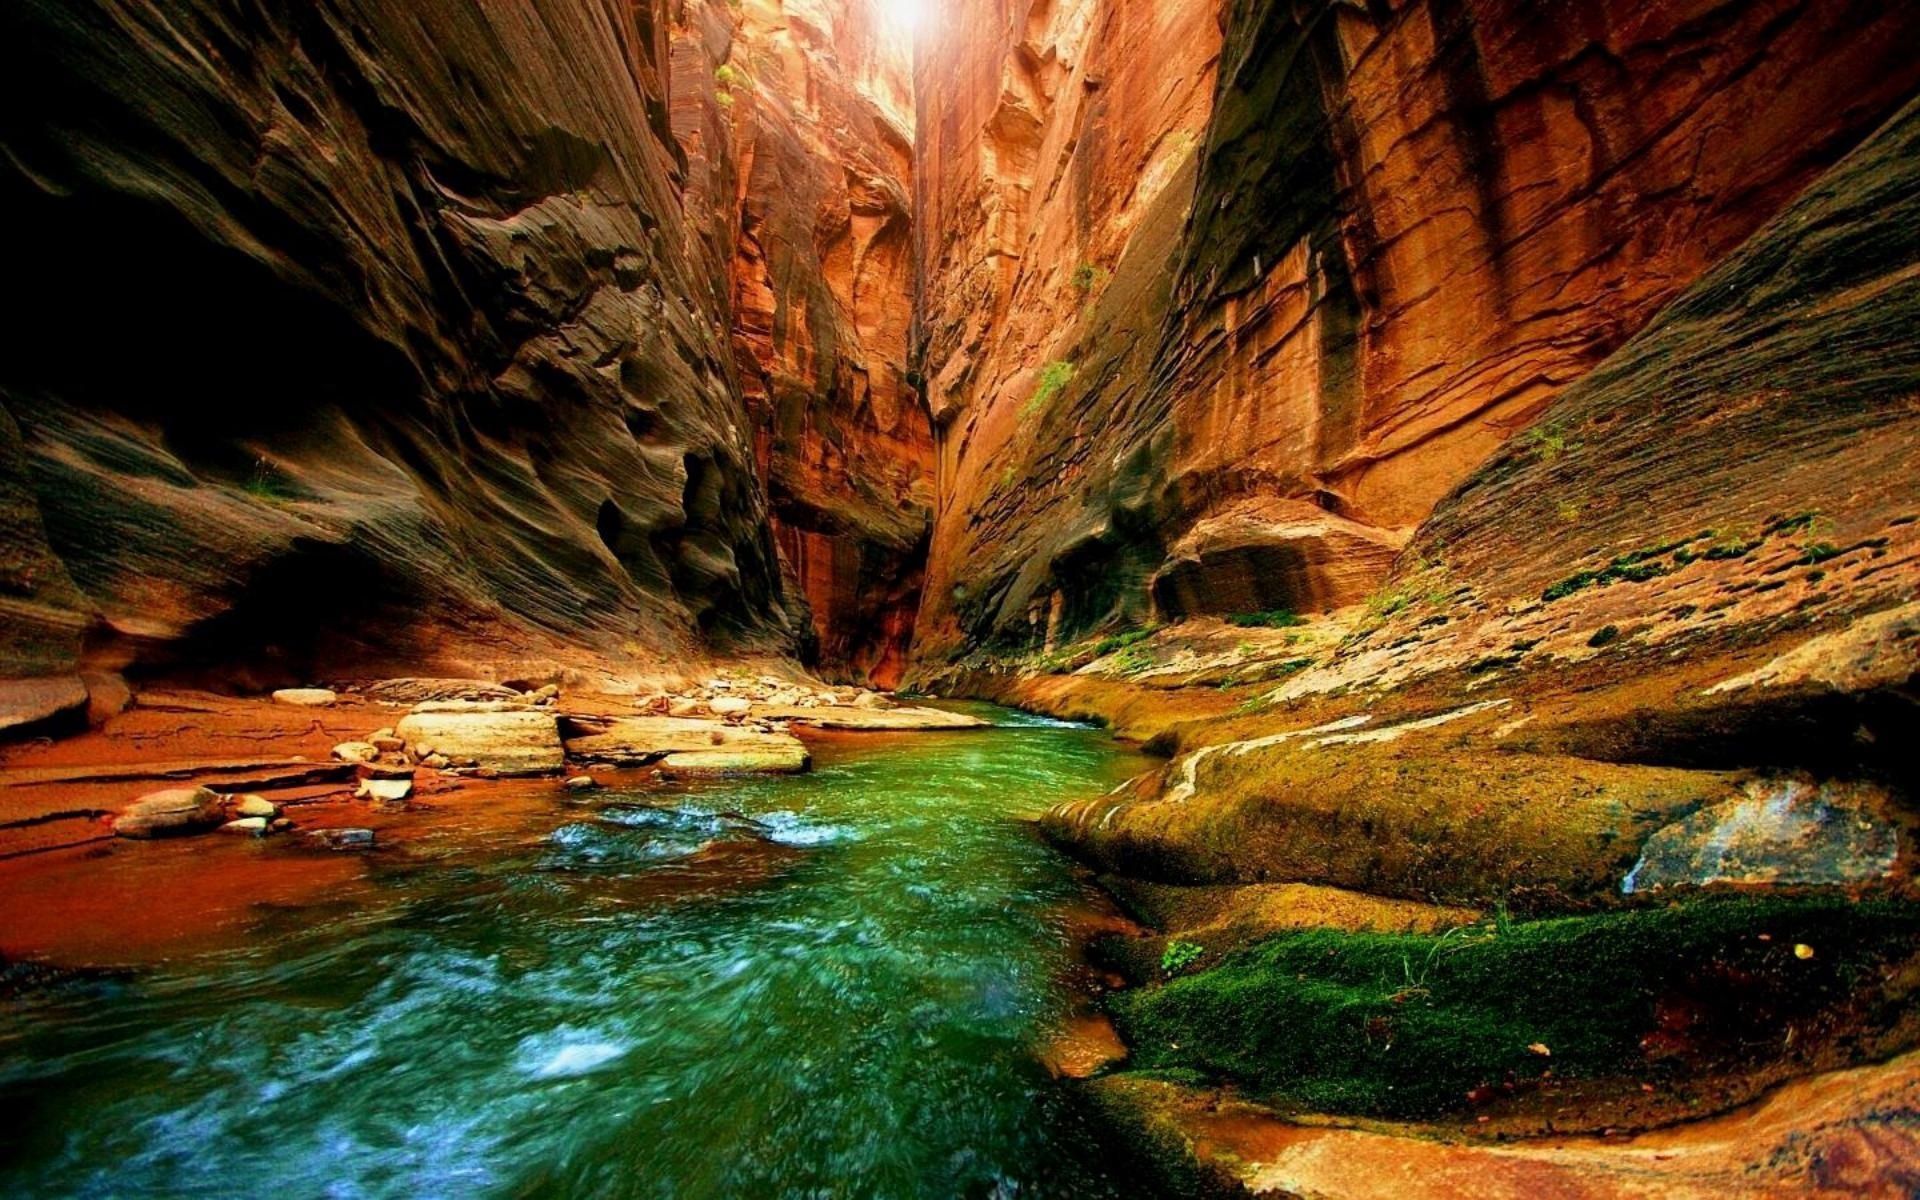 108737 download wallpaper nature, rivers, canyon, greens, moss, gorge screensavers and pictures for free